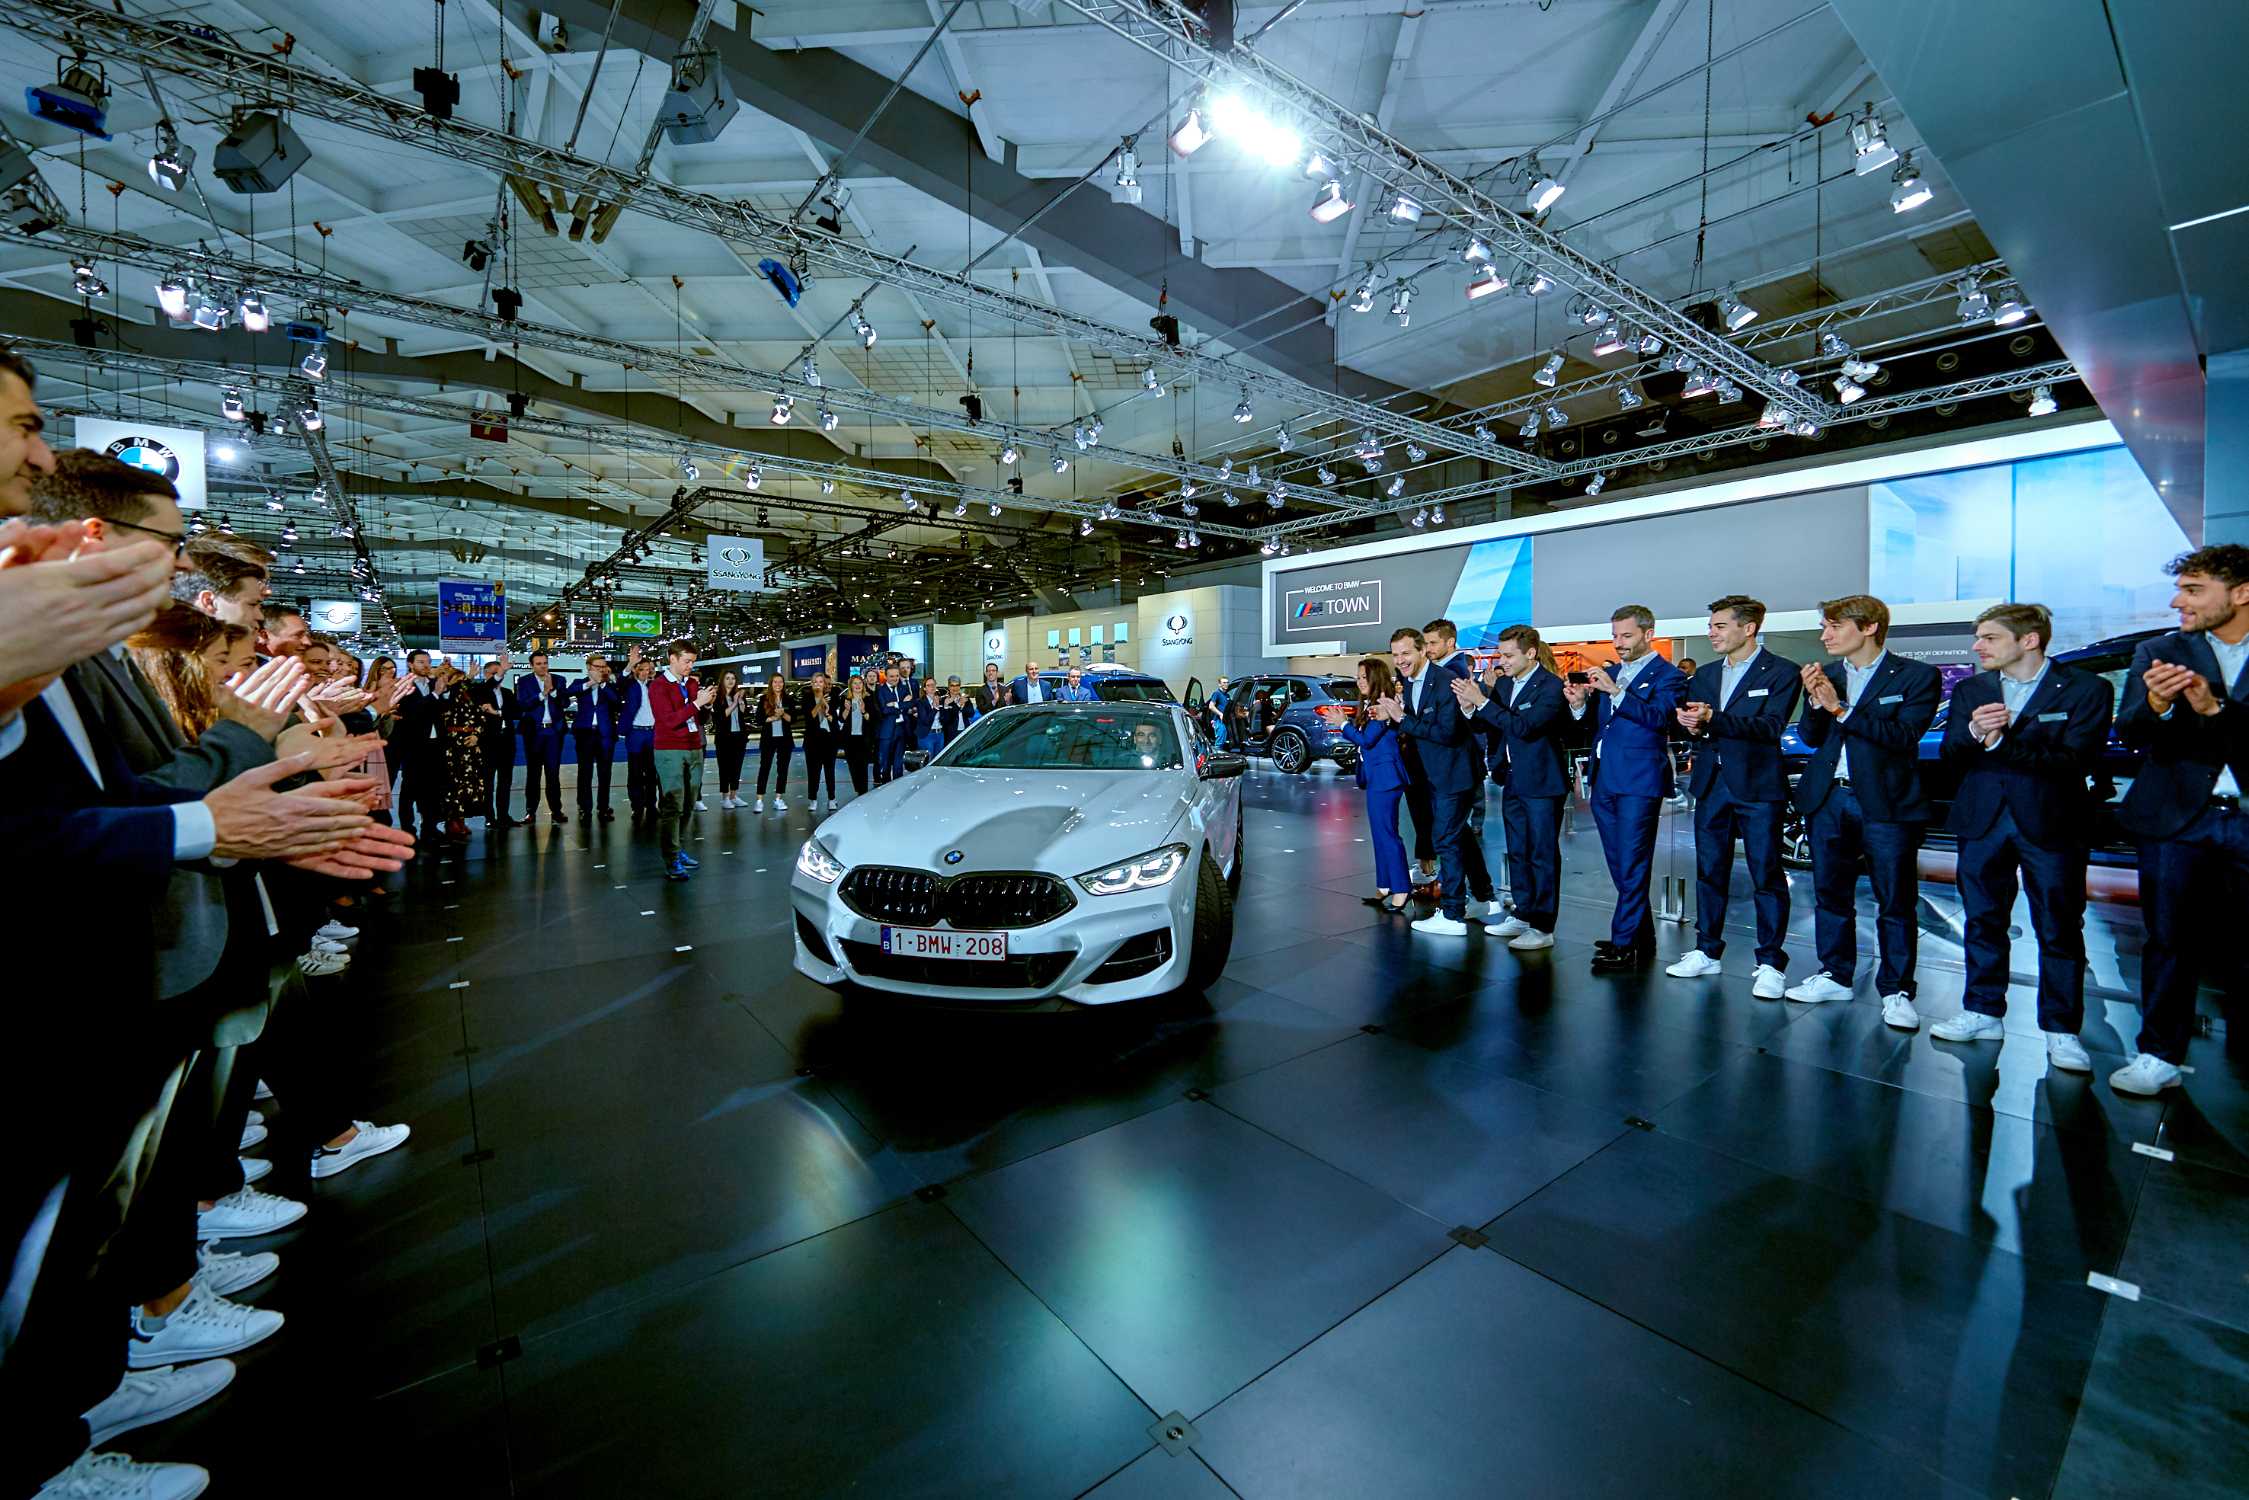 Roberto Martinez receives the keys to a BMW M850i xDrive Coupe at the Brussels Motor Show - the BMW and MINI team celebrating the sportive performances of the Red Devils (01/2019)